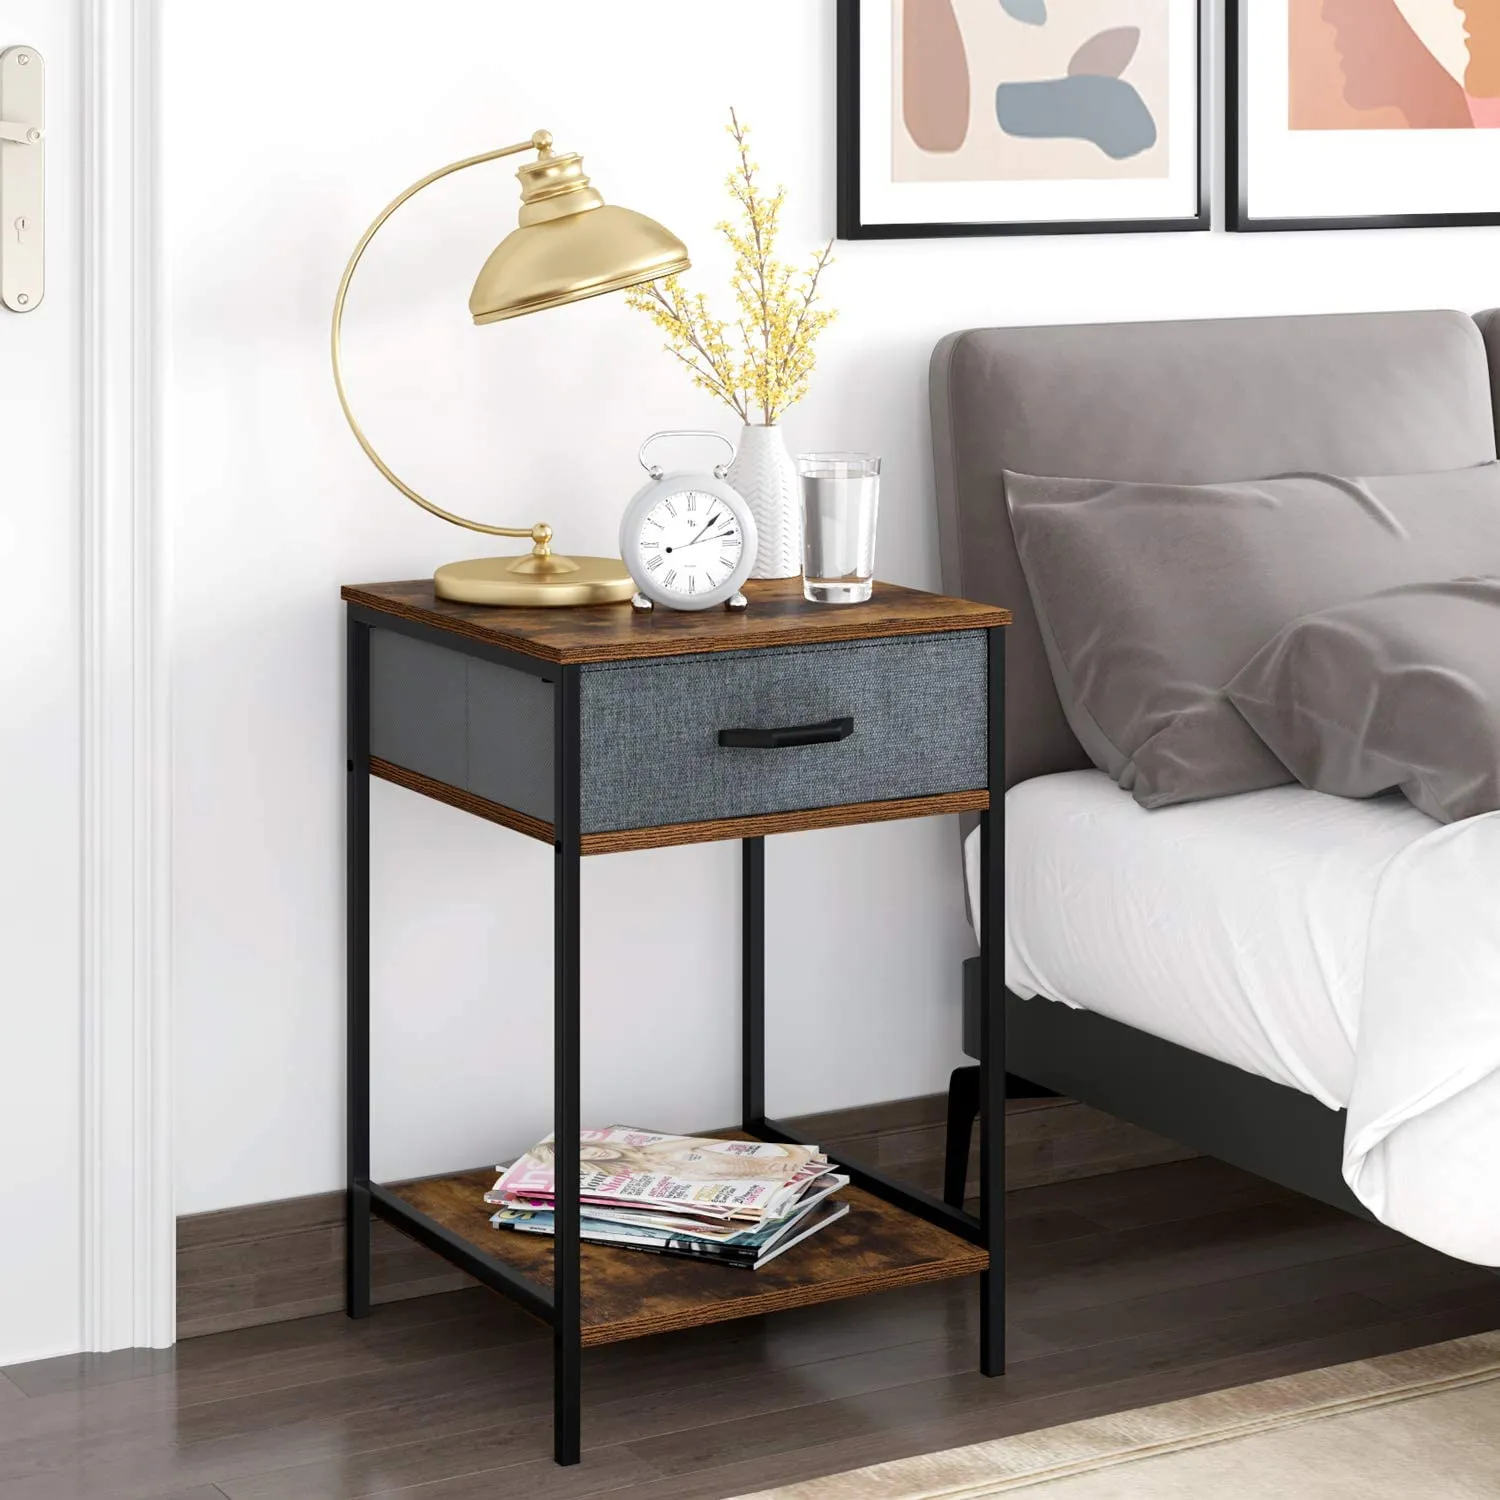 Nightstand 2-Tier End Table with 1 Fabric Drawer Modern Bedroom Furniture Dresser Storage Organizer and Open Shelf Accent Desk